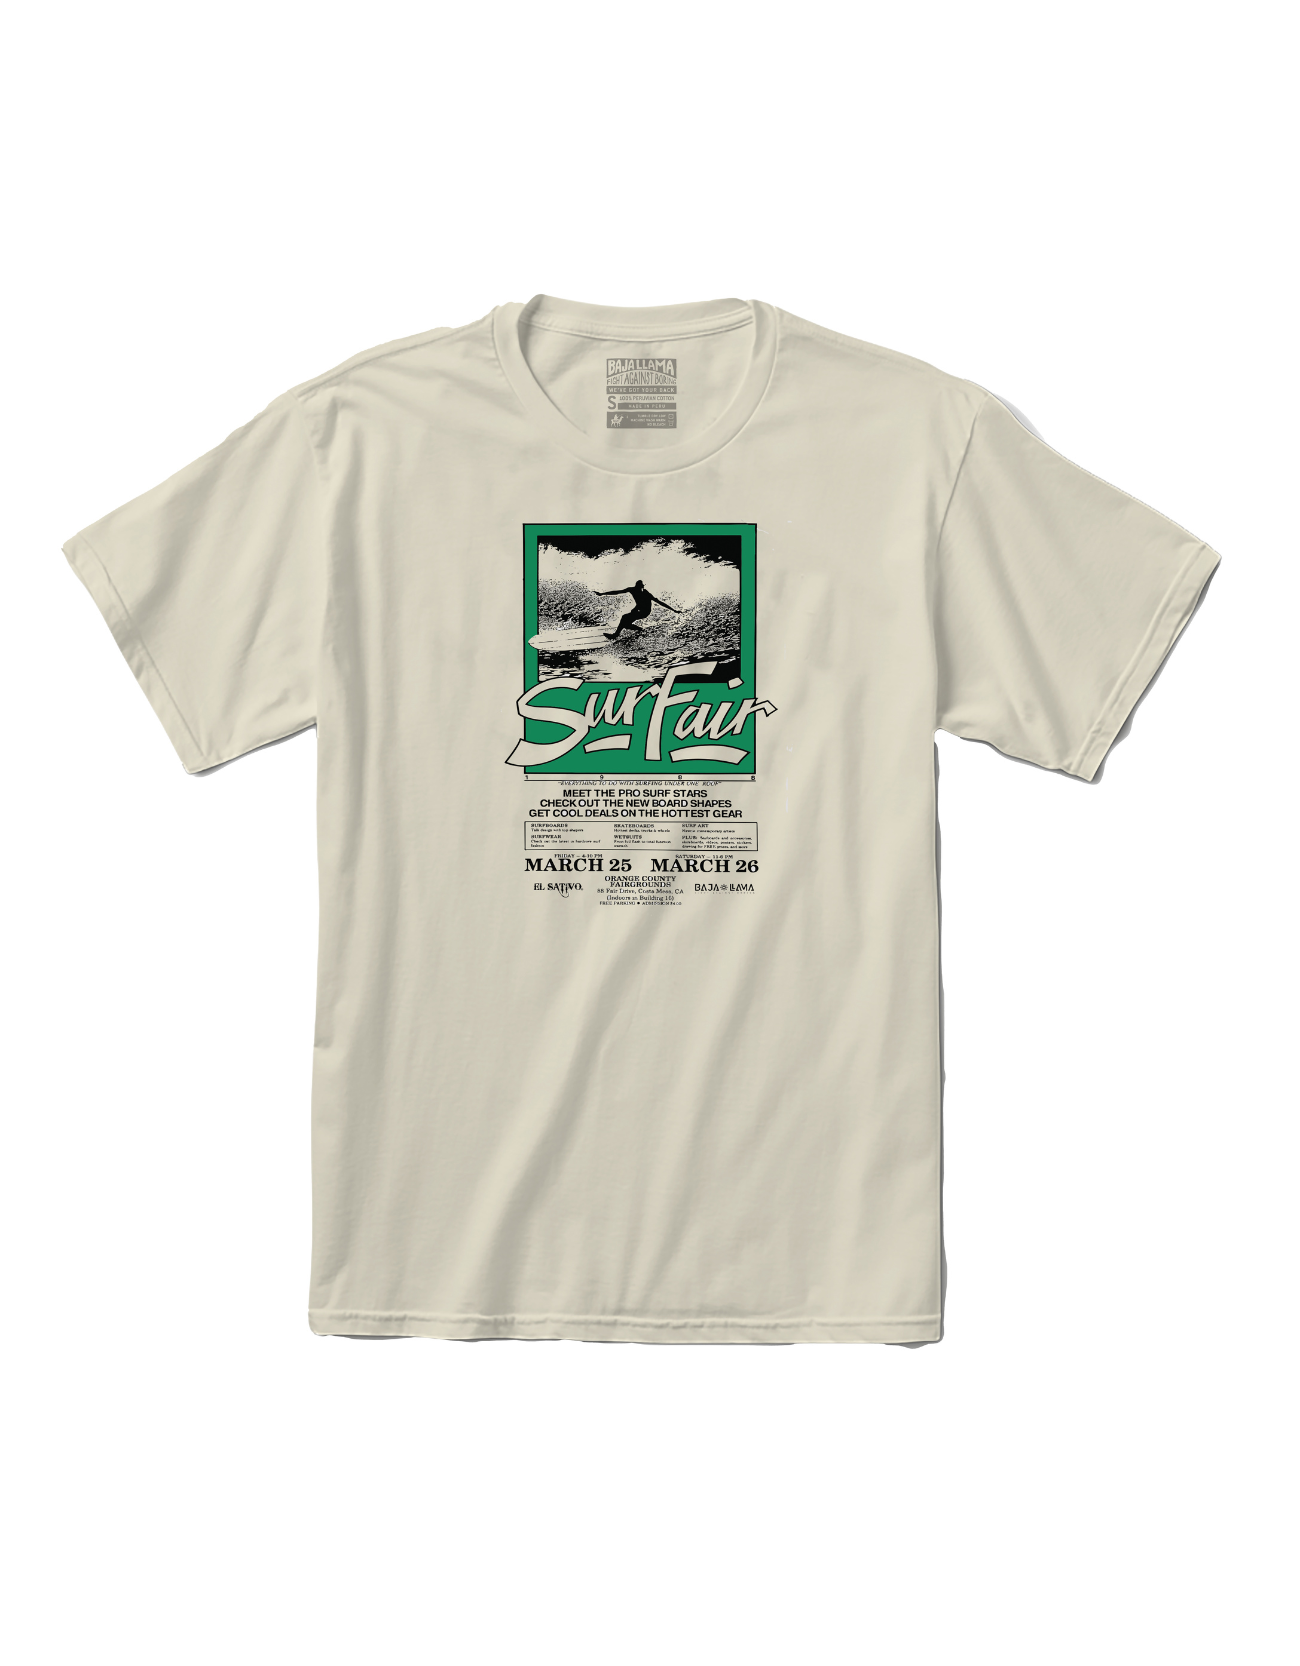 SURF FAIR GAME - PRIMO GRAPHIC TEE by Bajallama